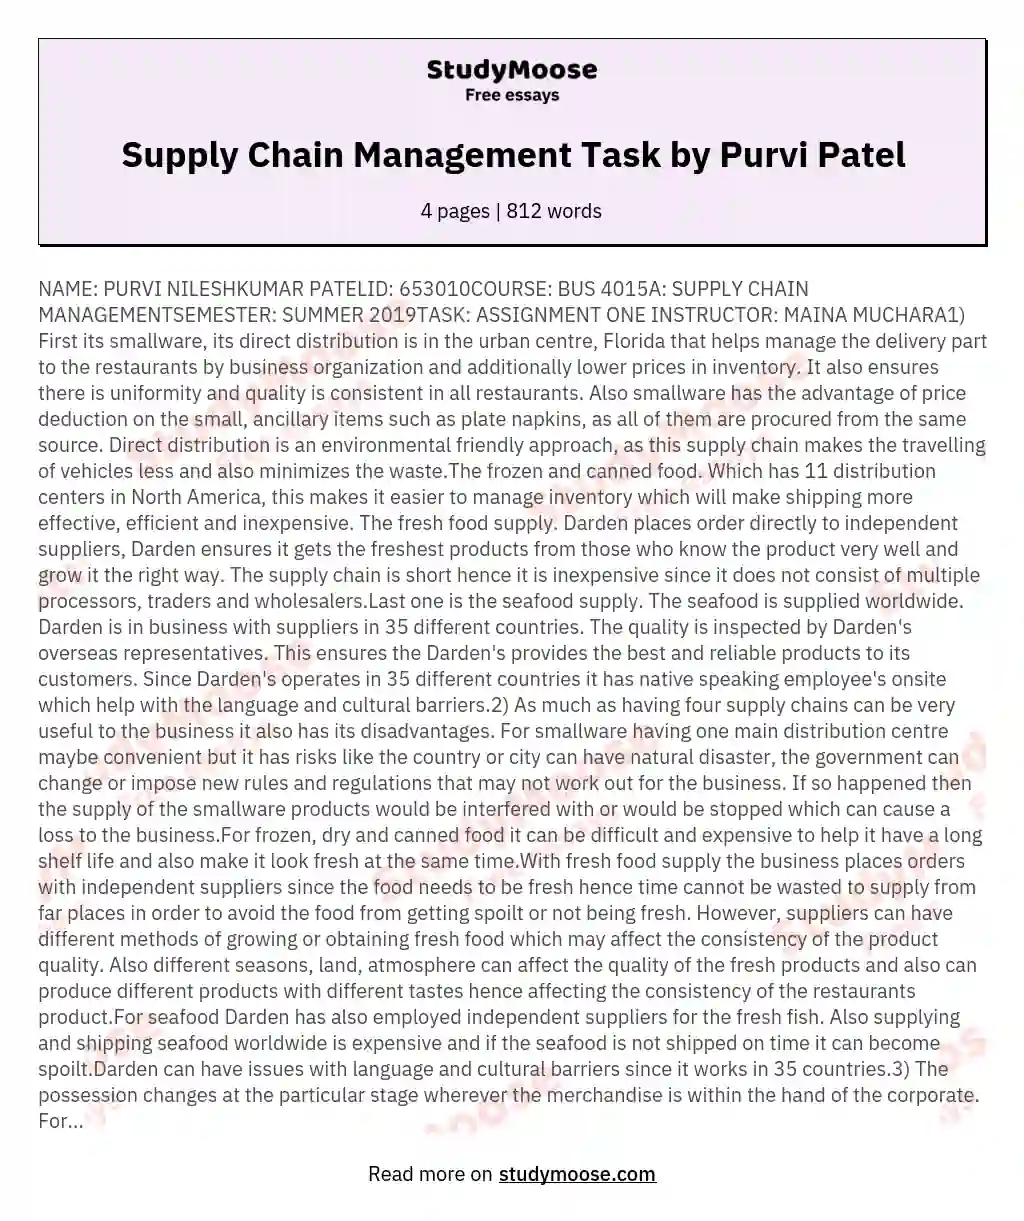 Supply Chain Management Task by Purvi Patel essay